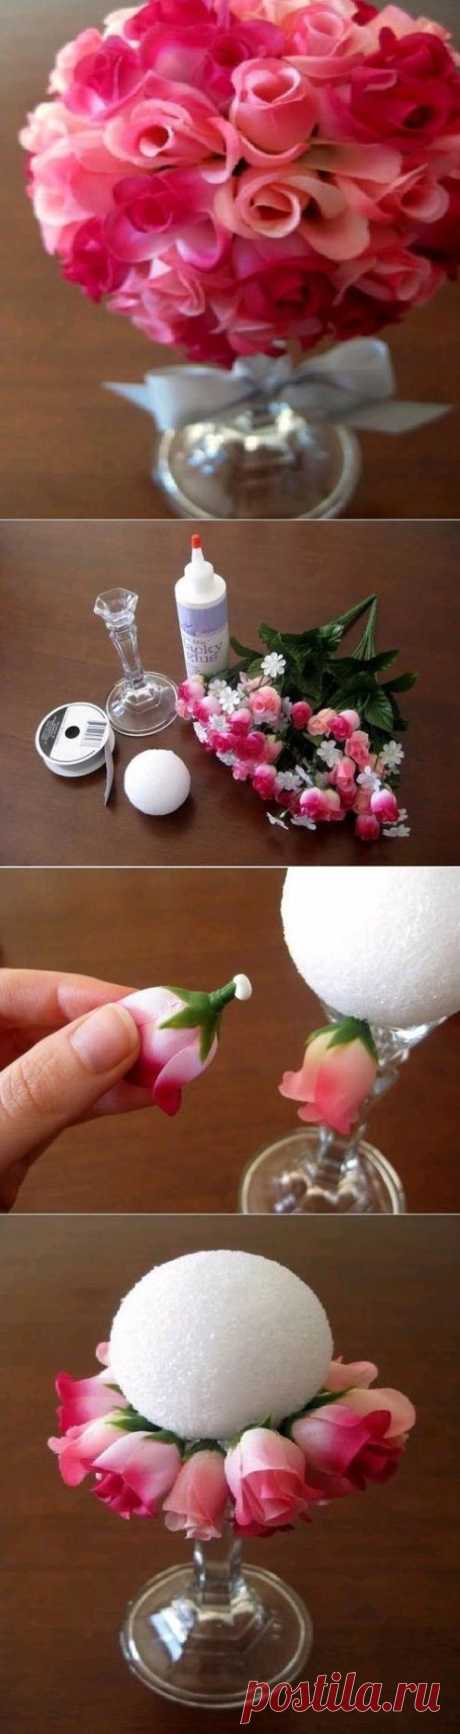 DIY Flower Ball Pictures, Photos, and Images for Facebook, Tumblr, Pinterest, and Twitter